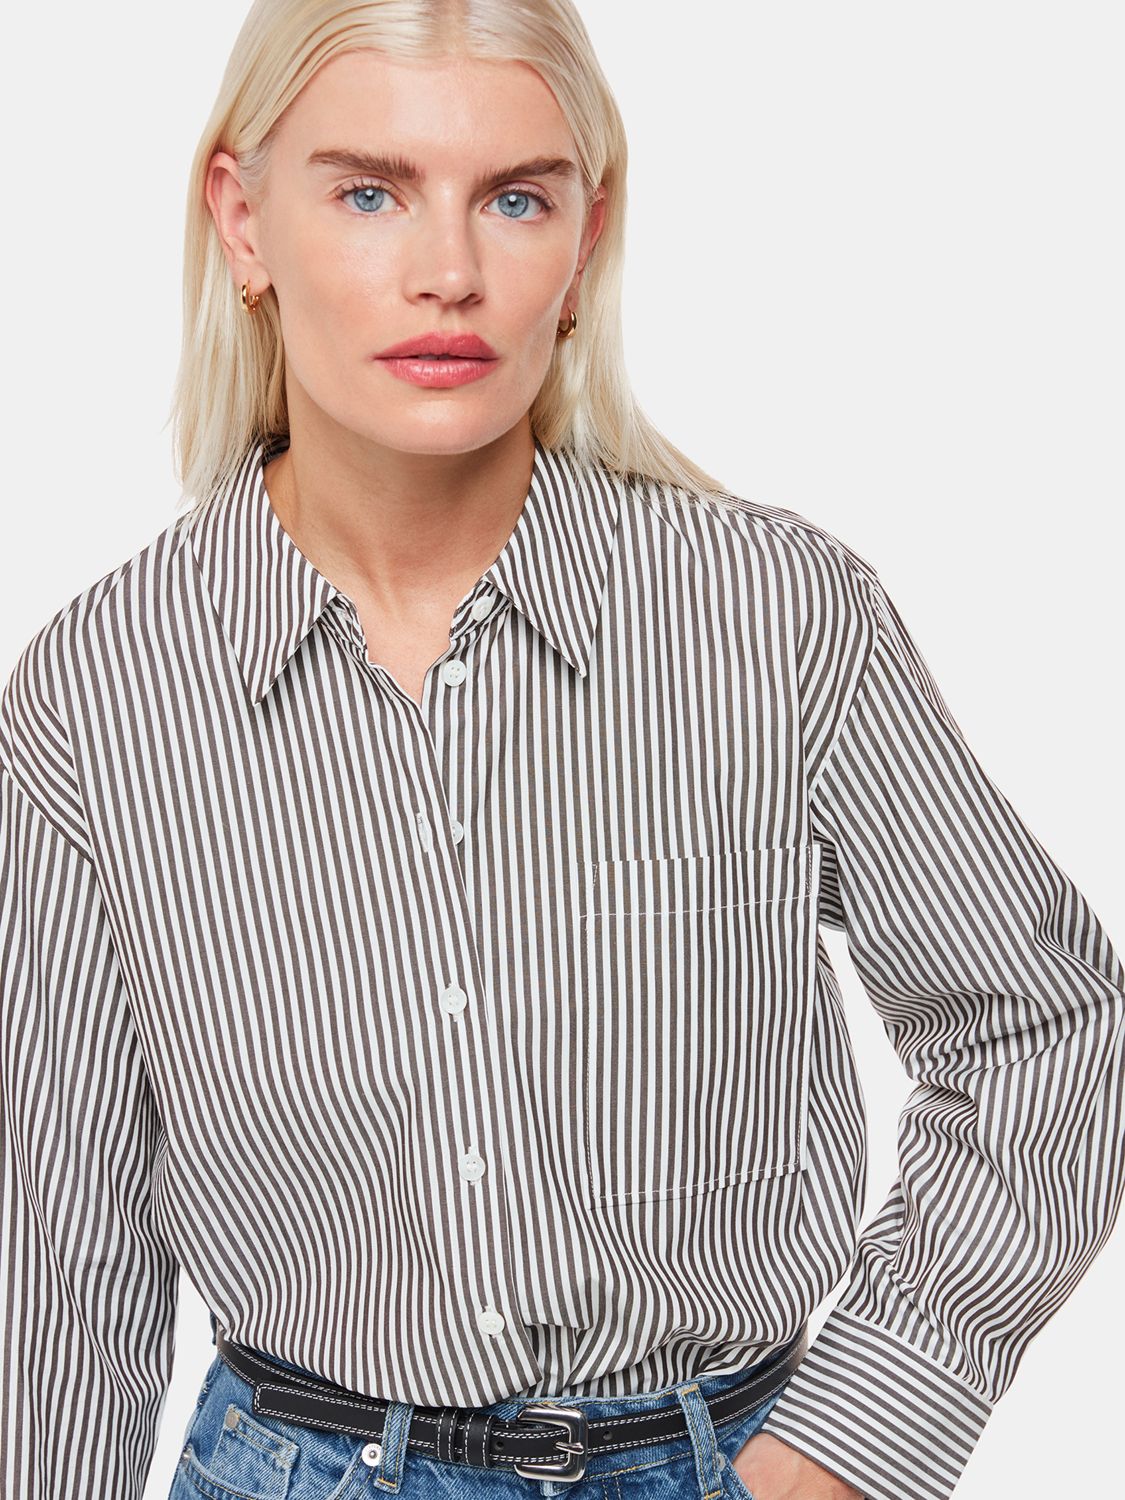 Whistles Petite Striped Relaxed Fit Shirt, Black/White, 6